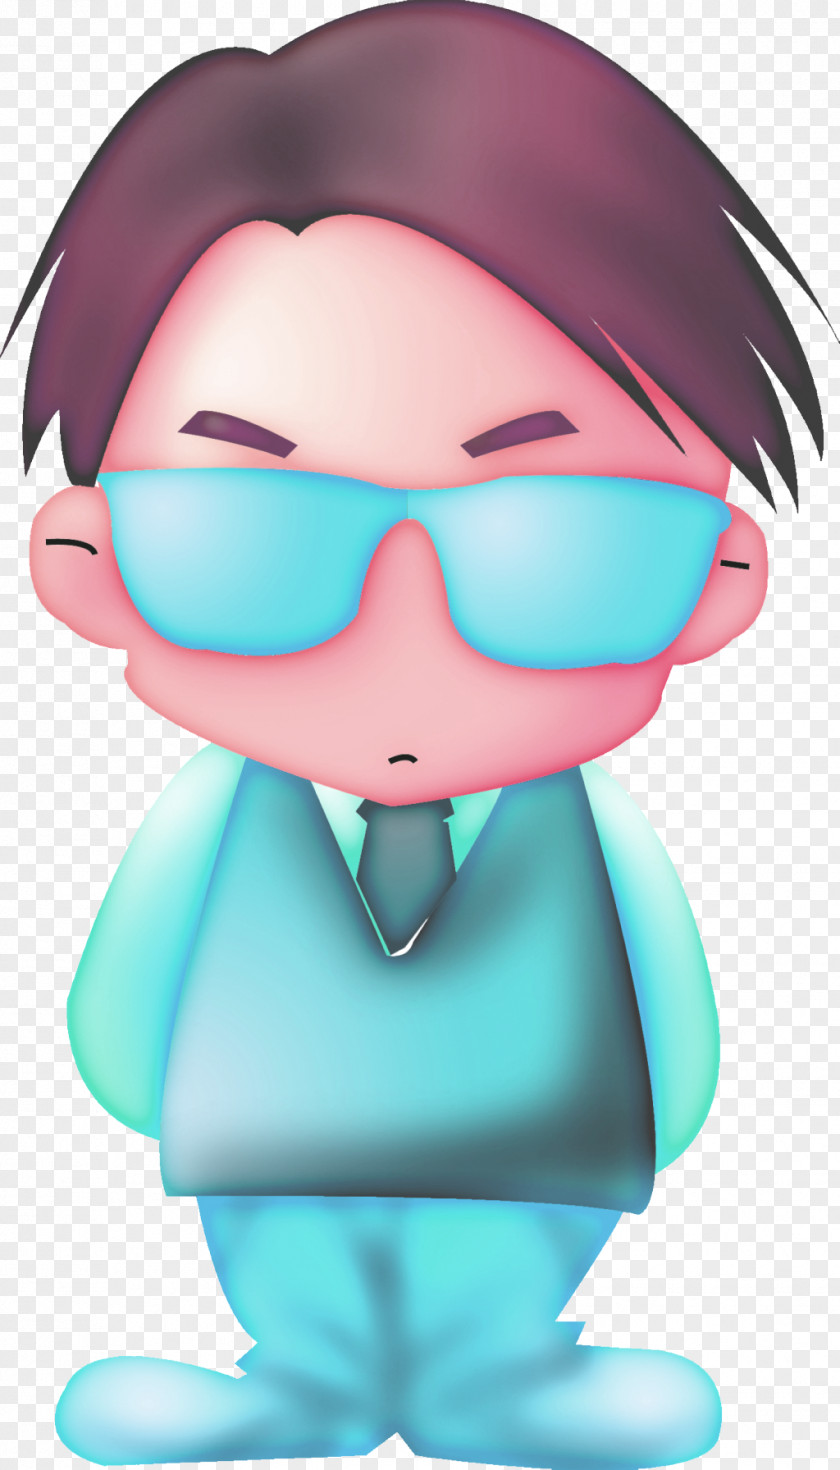 Man Wearing Sunglasses Goggles PNG